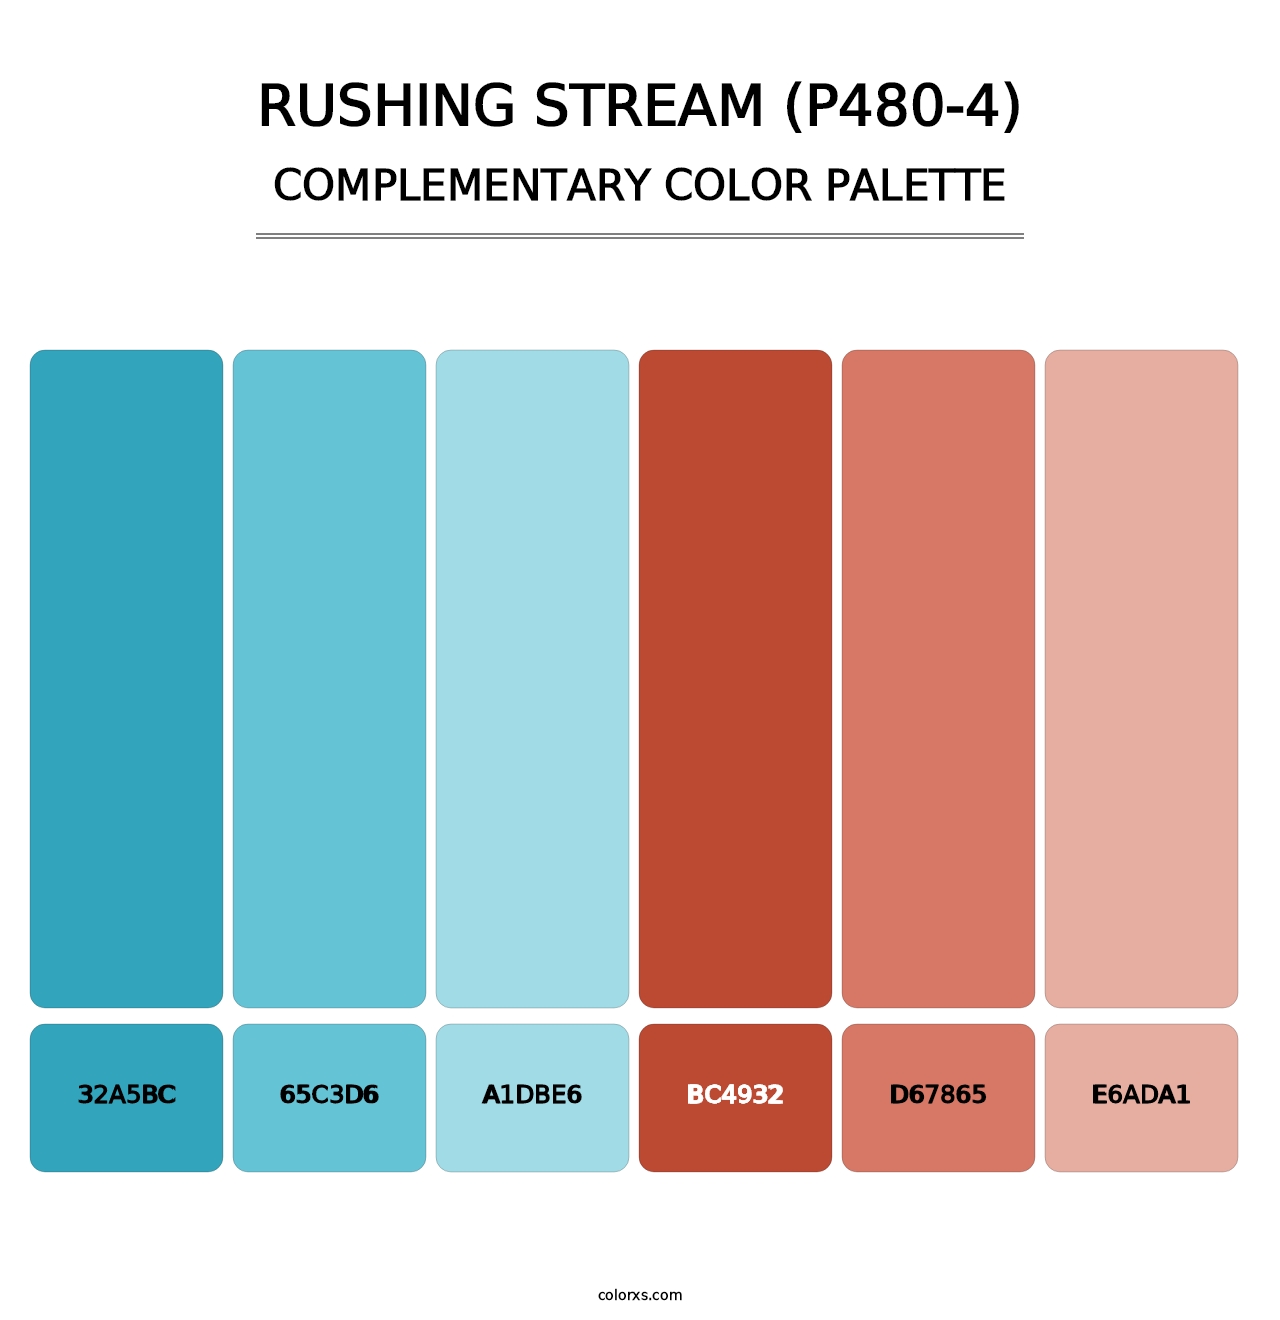 Rushing Stream (P480-4) - Complementary Color Palette